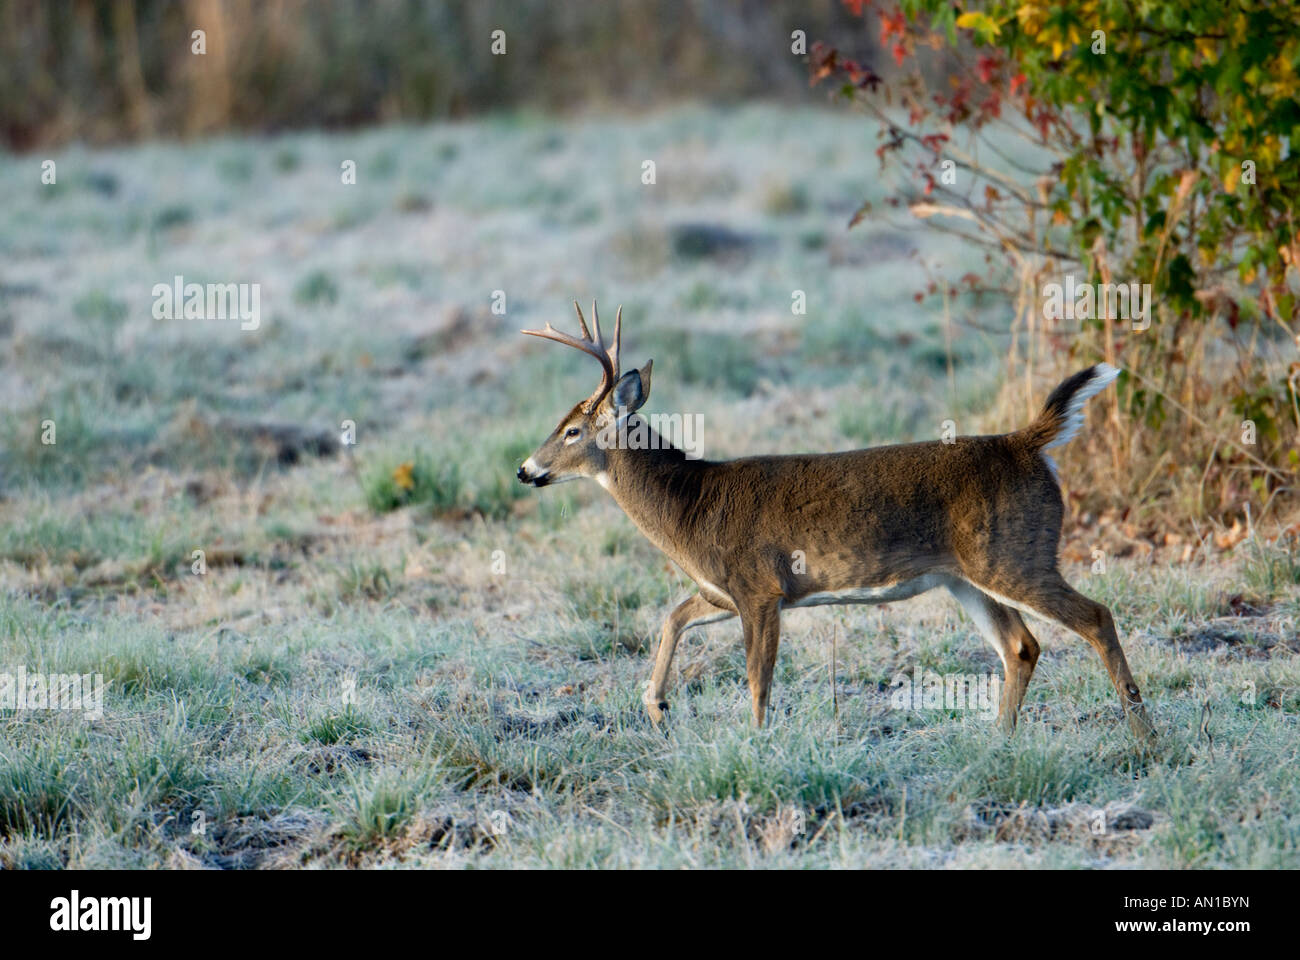 Broadside view of an 8-point buck running Stock Photo